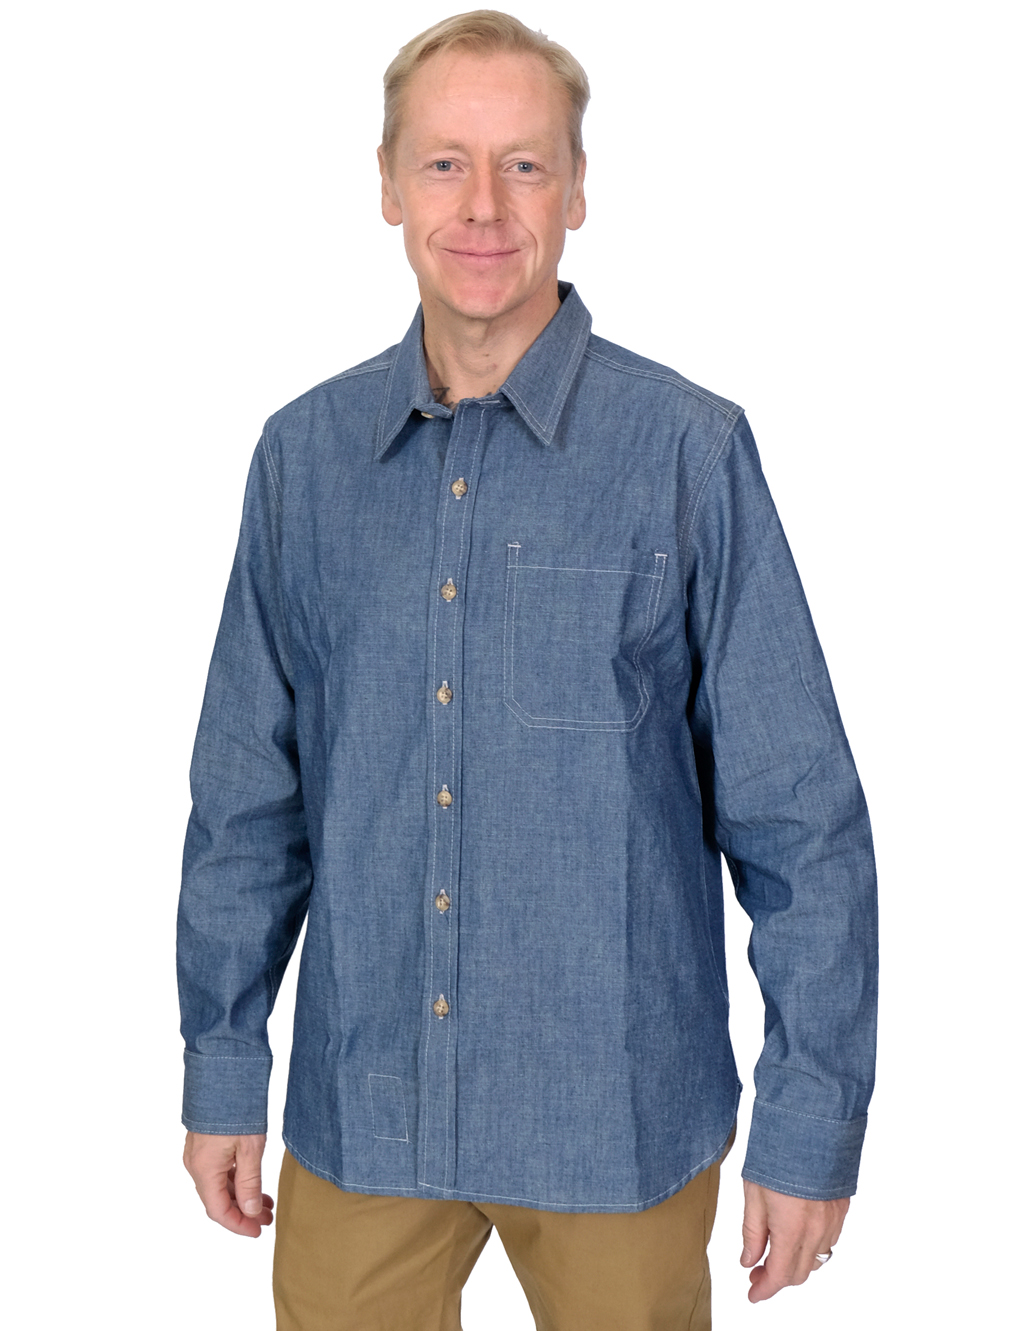 Ginew---Mohican-Crew-Shirt-Chambray-Shirt---Blue-1